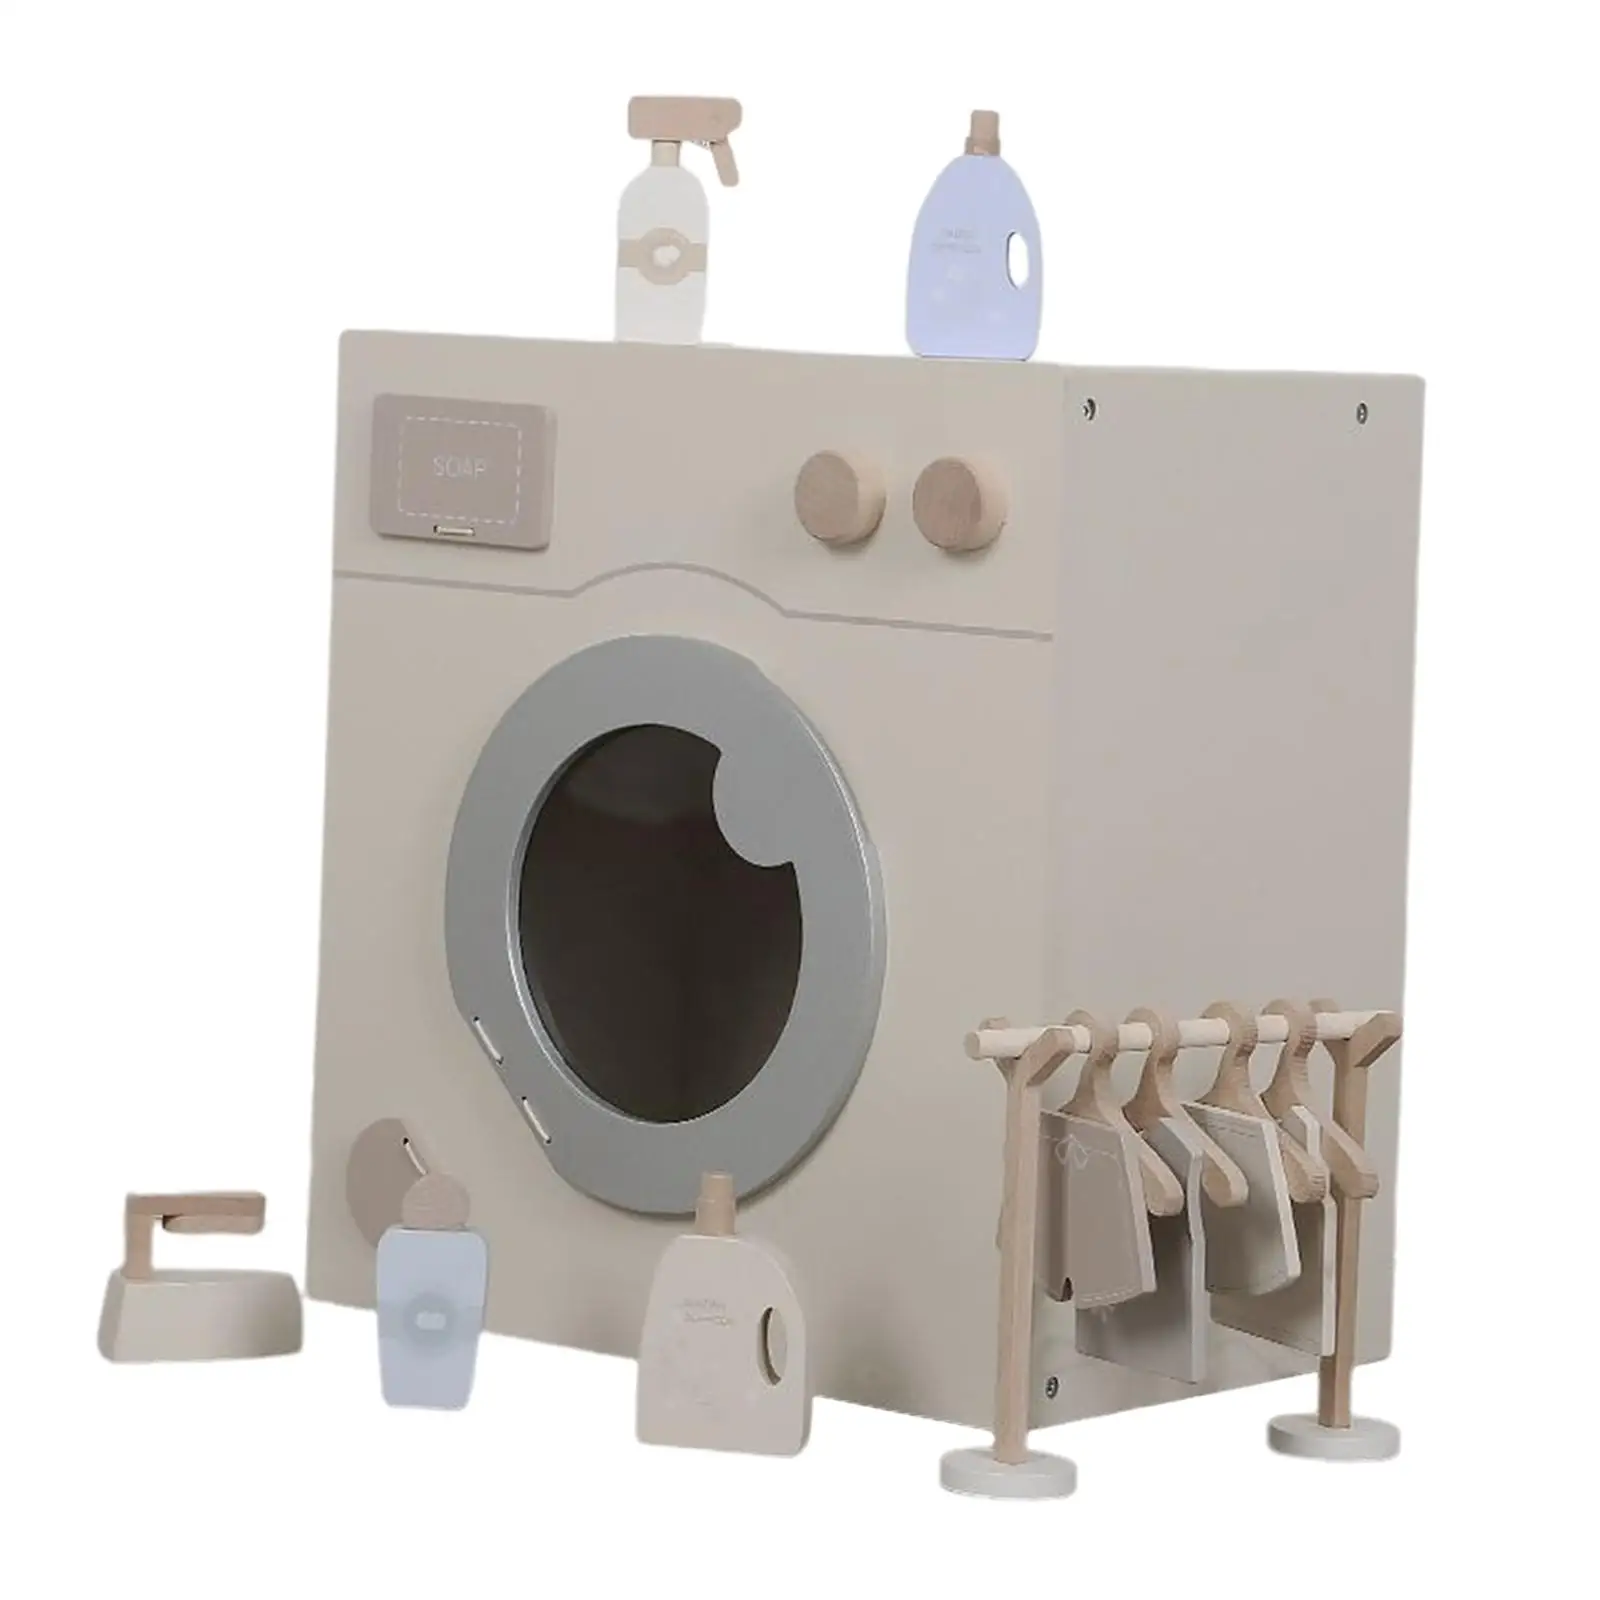 Washing Machine Playset with Accessories Pretend Play for Toddlers Kids Gift